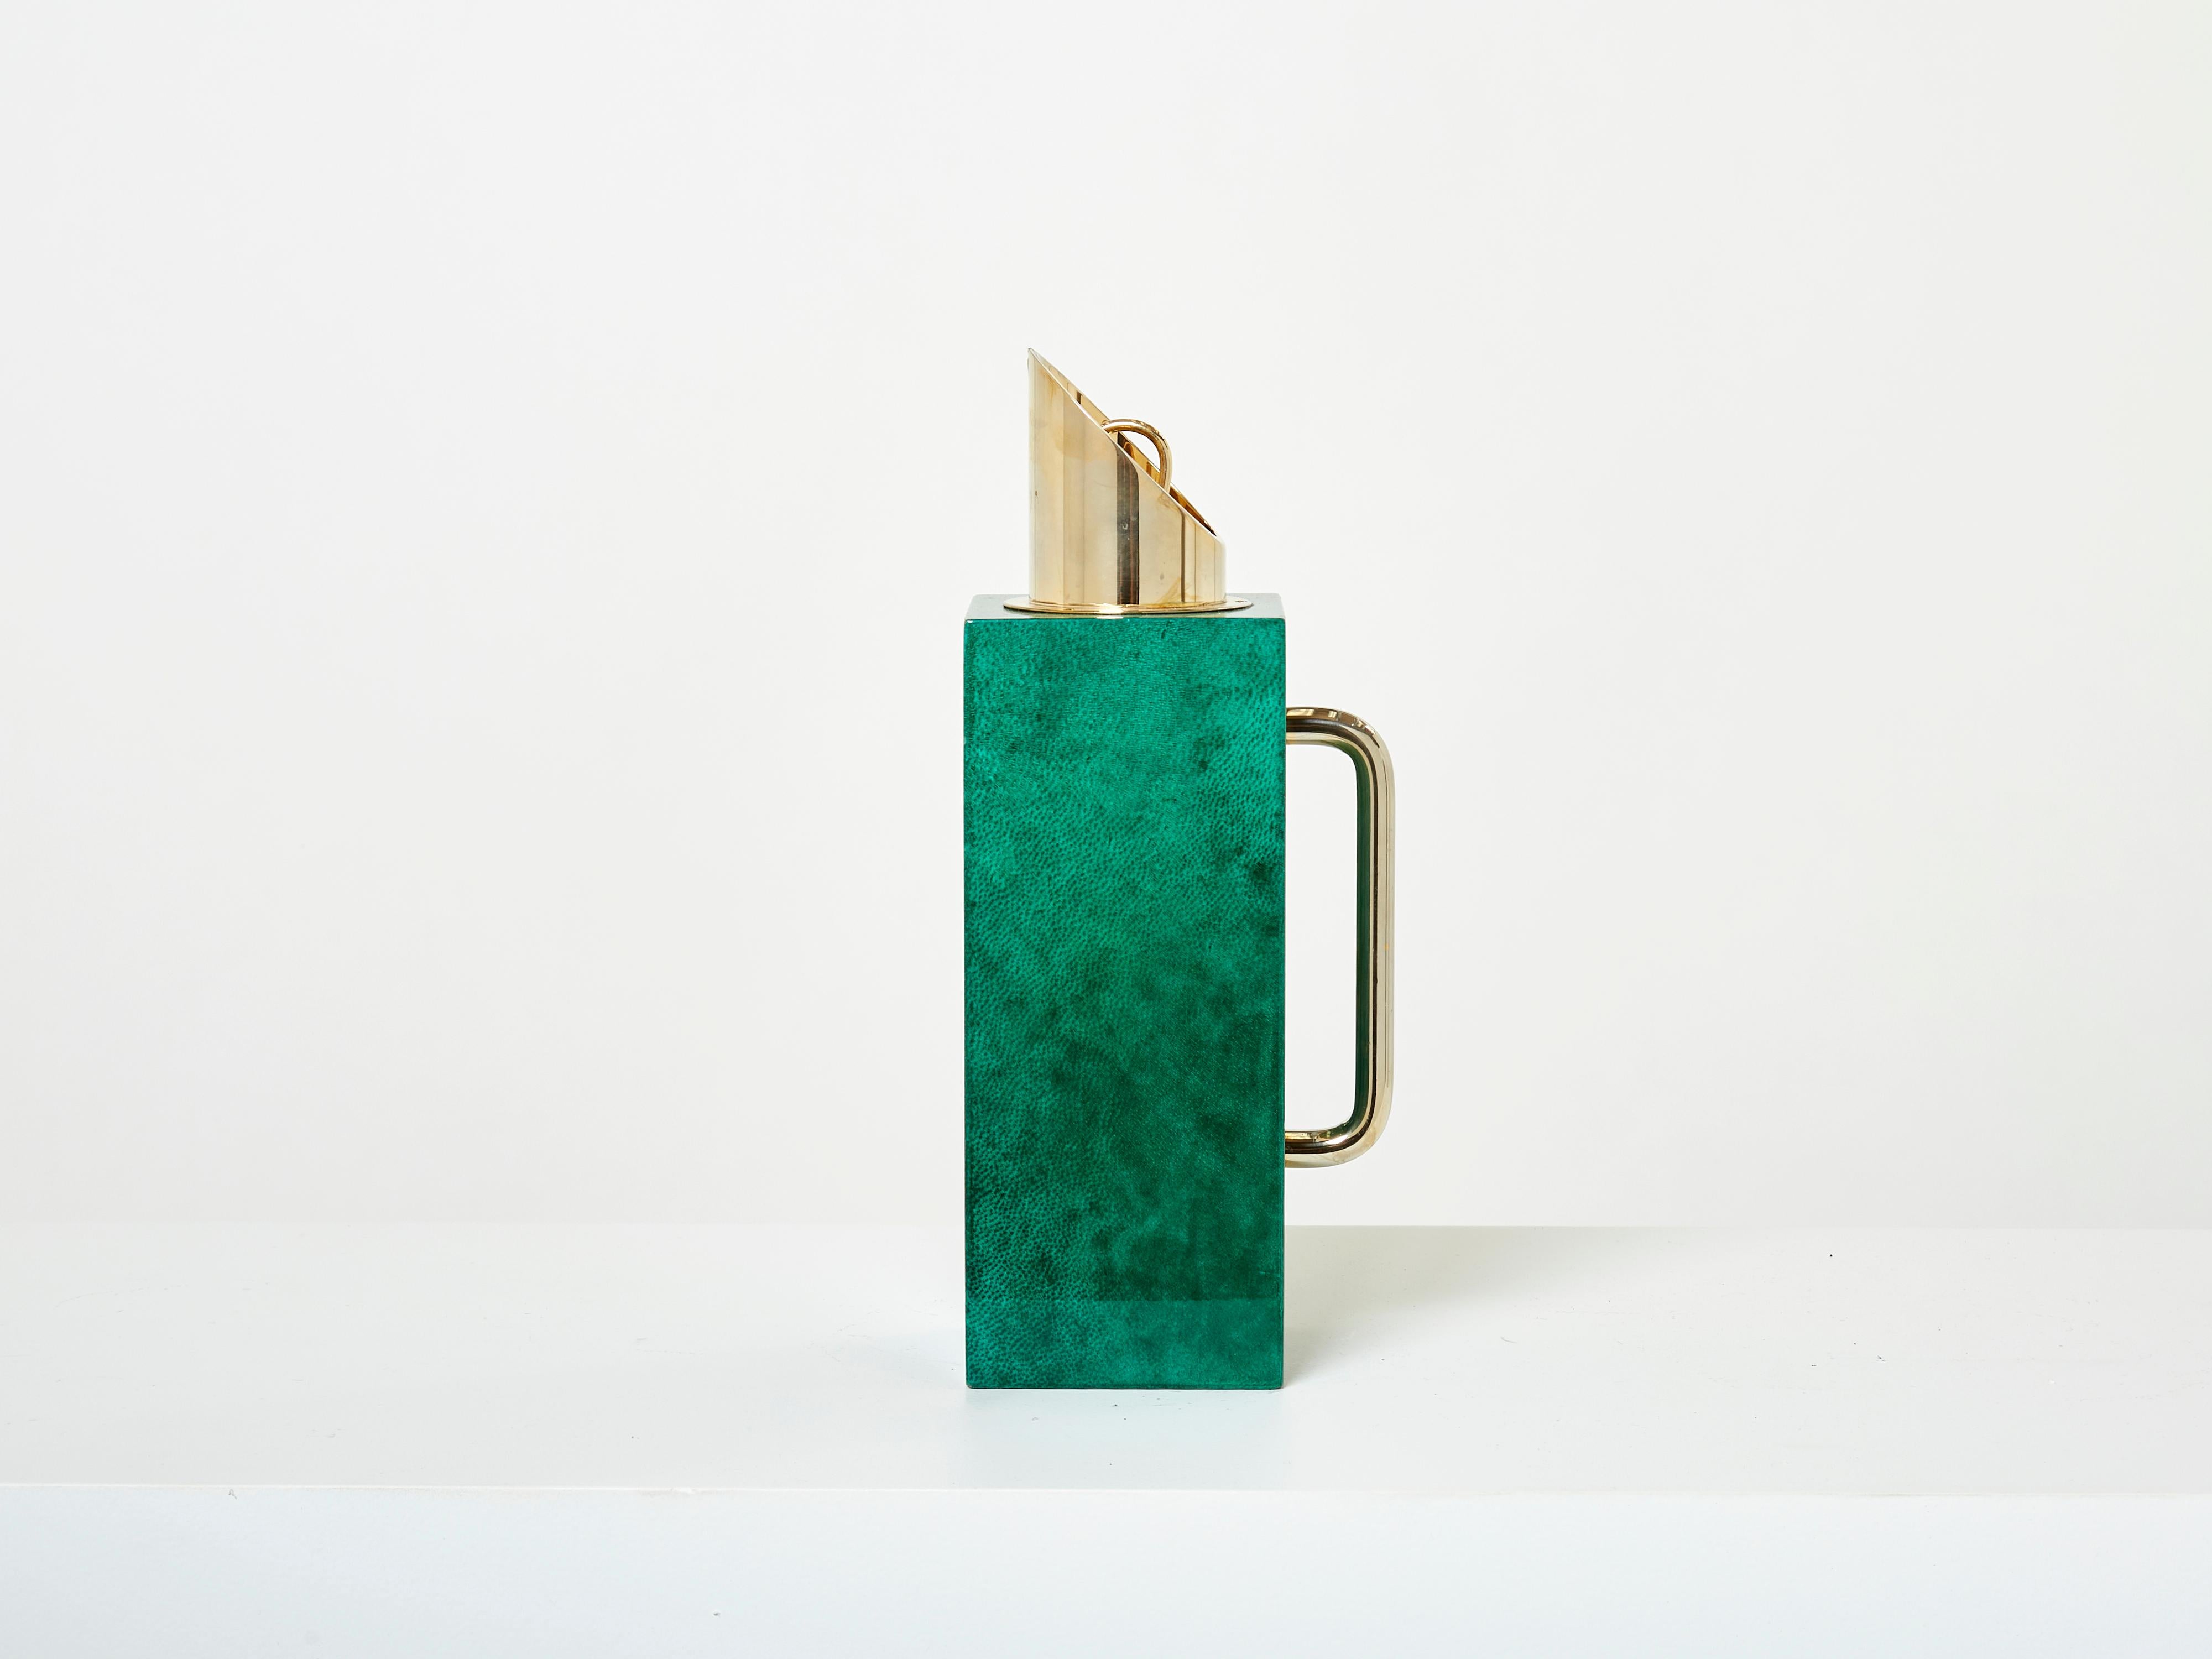 This is a beautiful thermos or carafe or pitcher designed by Aldo Tura in the early 1960s. This carafe is covered by goatskin parchment, in rich shades of emerald green, with brass and gilt metal details, typical of Aldo Tura’s work. This pitcher is